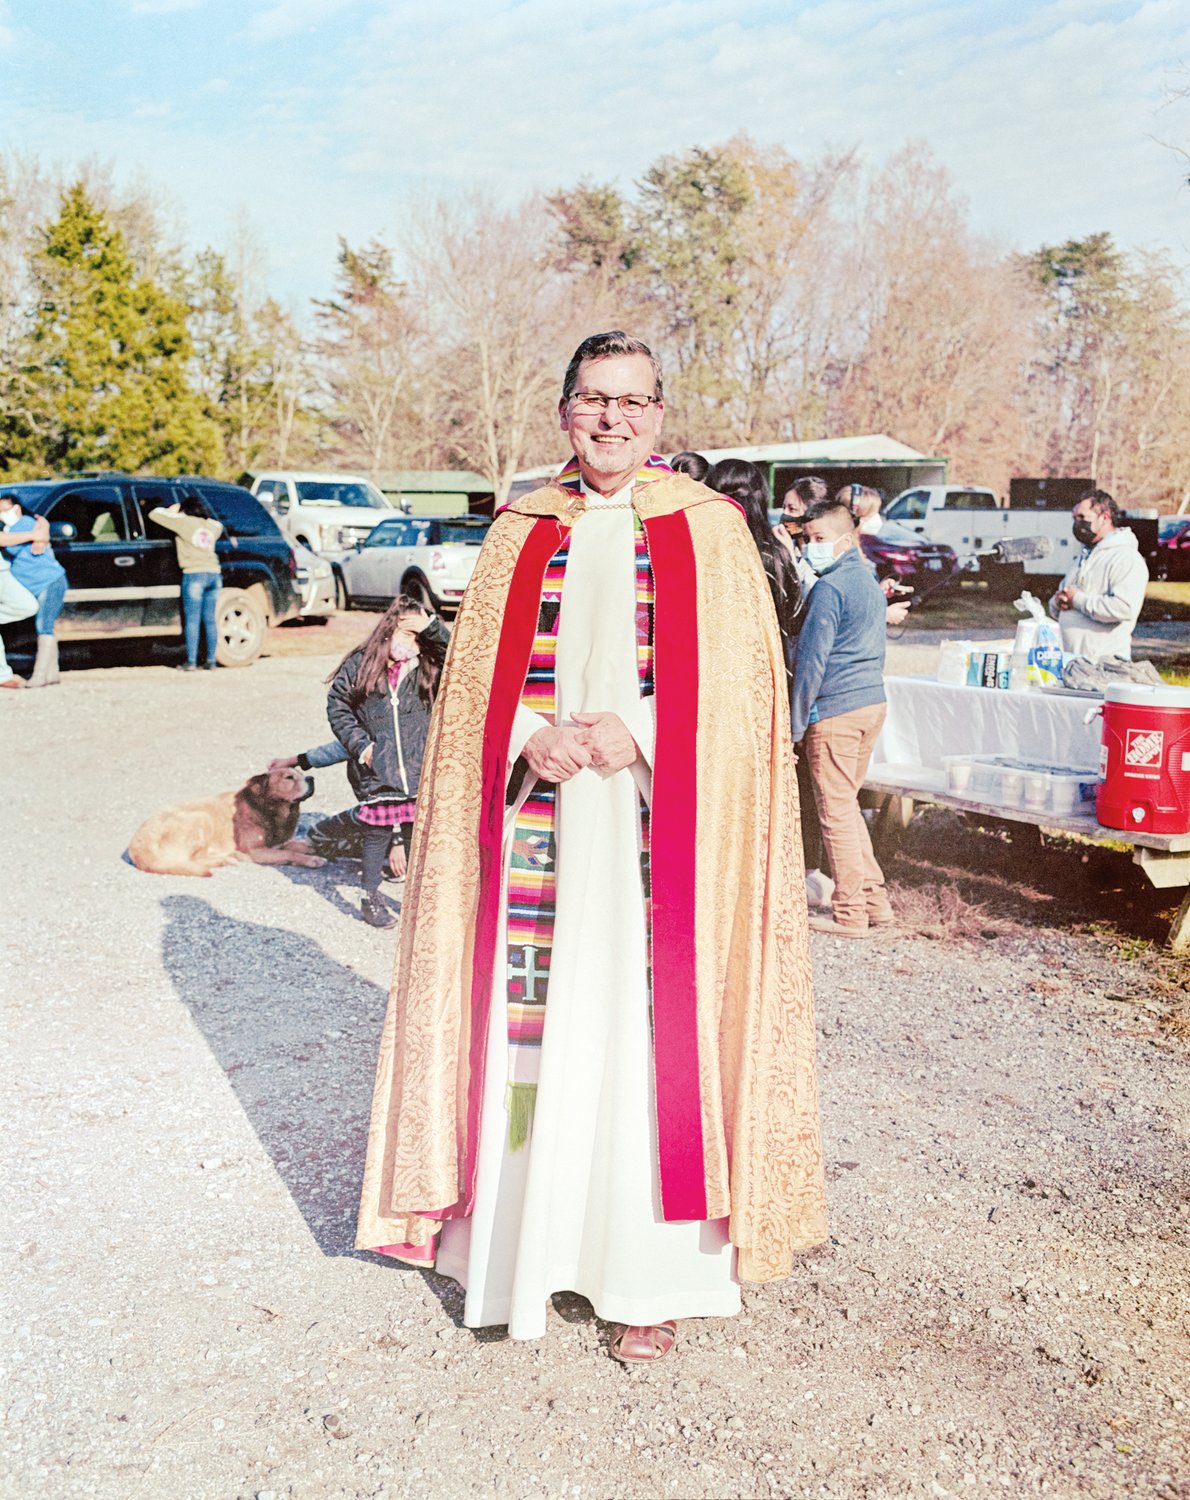 Father Julio Martinez of St. Julia Catholic Church in Siler City stands in his ceremonial robe and gown amid the busyness of food distribution post-blessing.